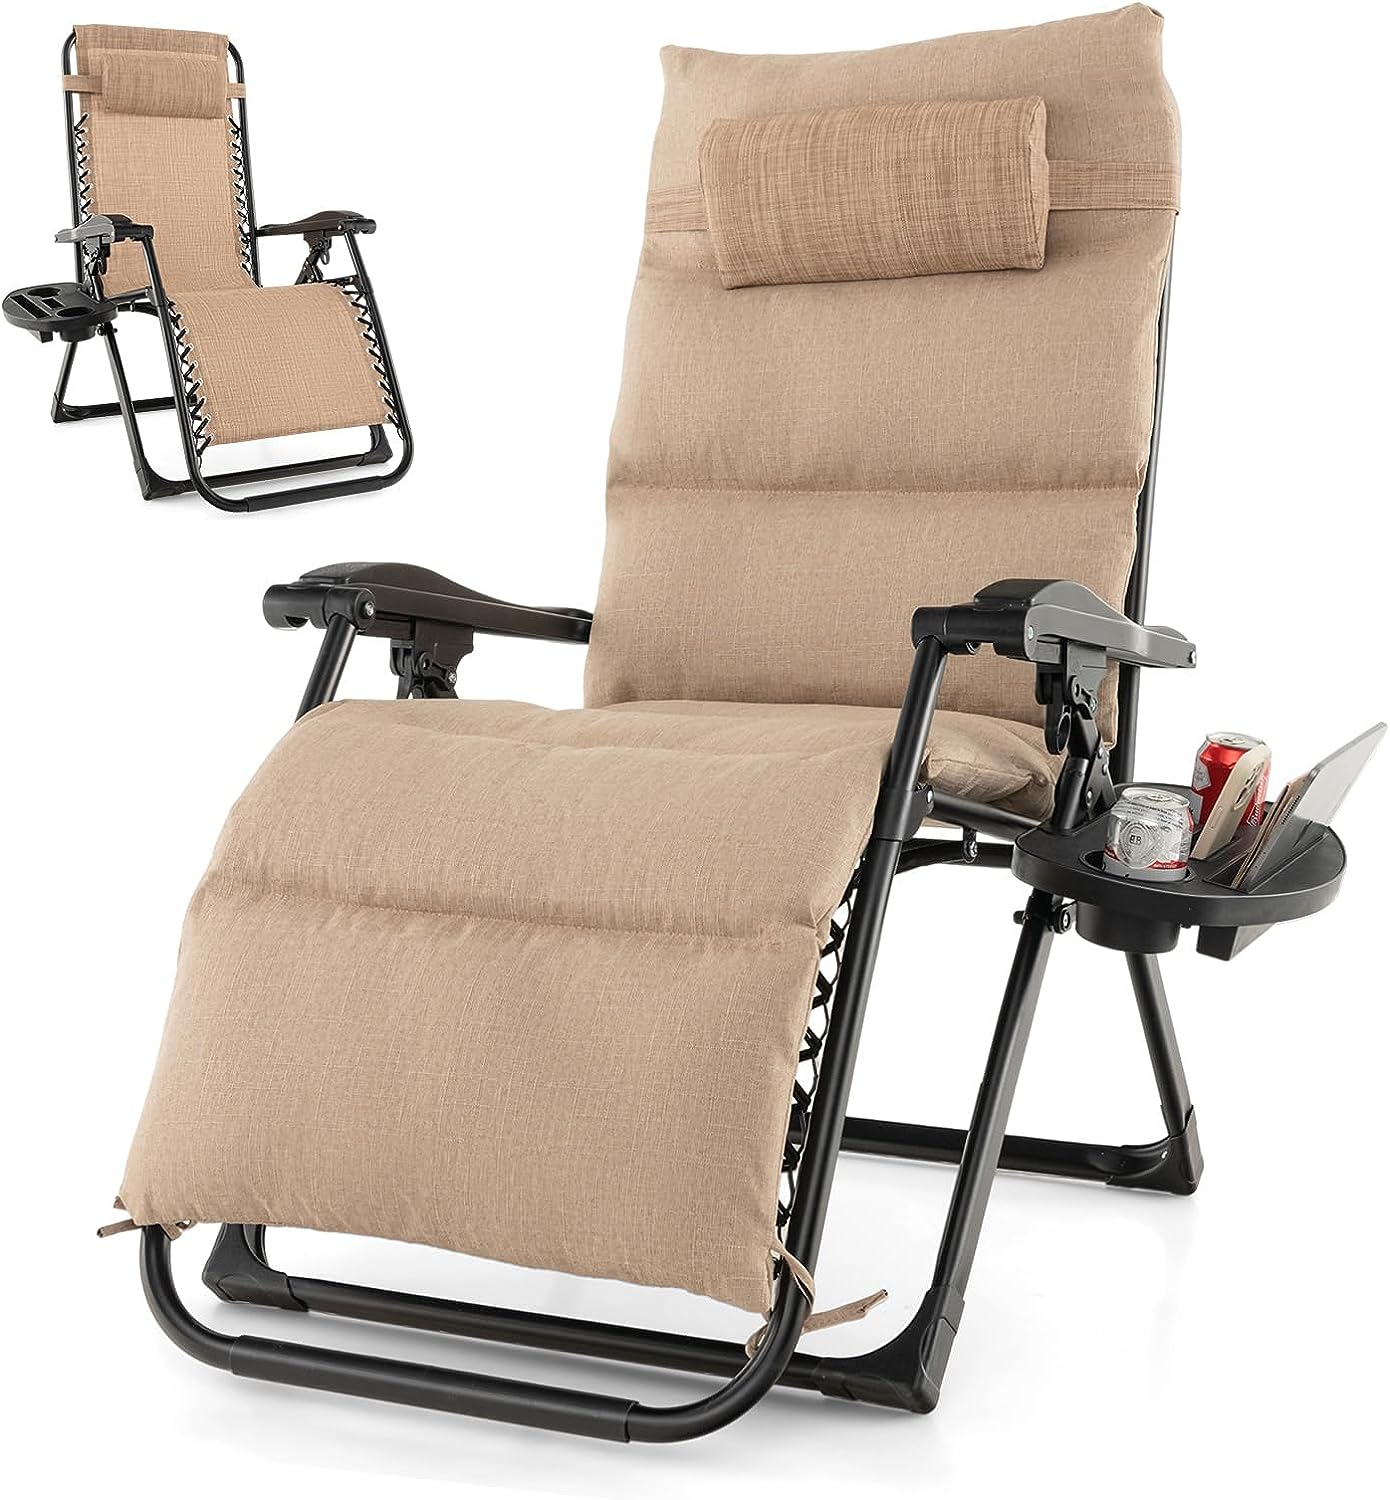 Giantex Zero Gravity Chair with Patio Cushions, Adjustable Folding Reclining Lounge Chair